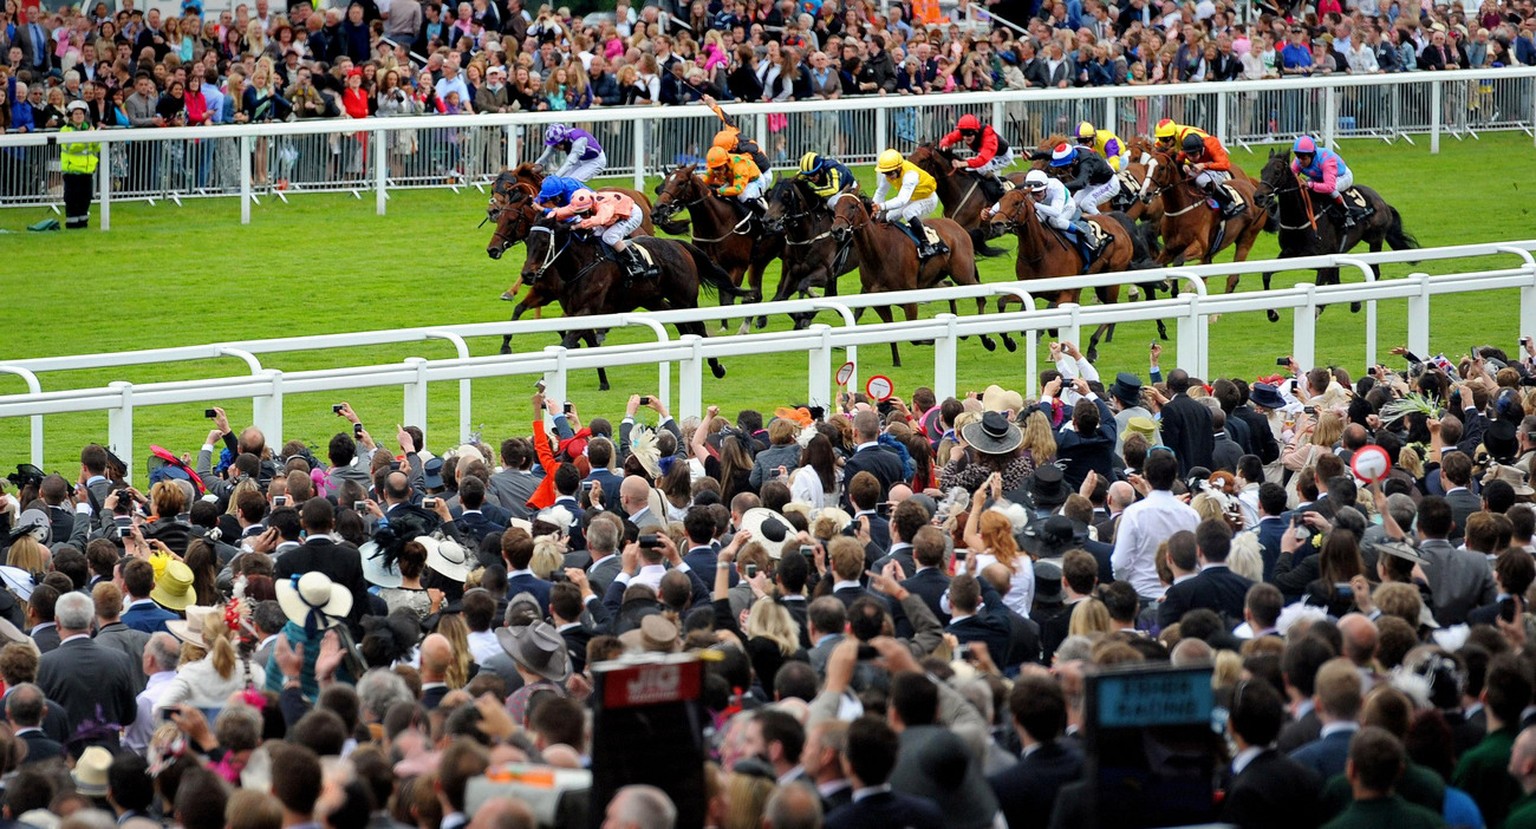 Black Caviar and jockey Luke Nolen lead the field during the Diamond Jubilee Stakes during day five of the 2012 Royal Ascot meeting at Ascot Racecourse, England Saturday June 23, 2012. Black Caviar wo ...